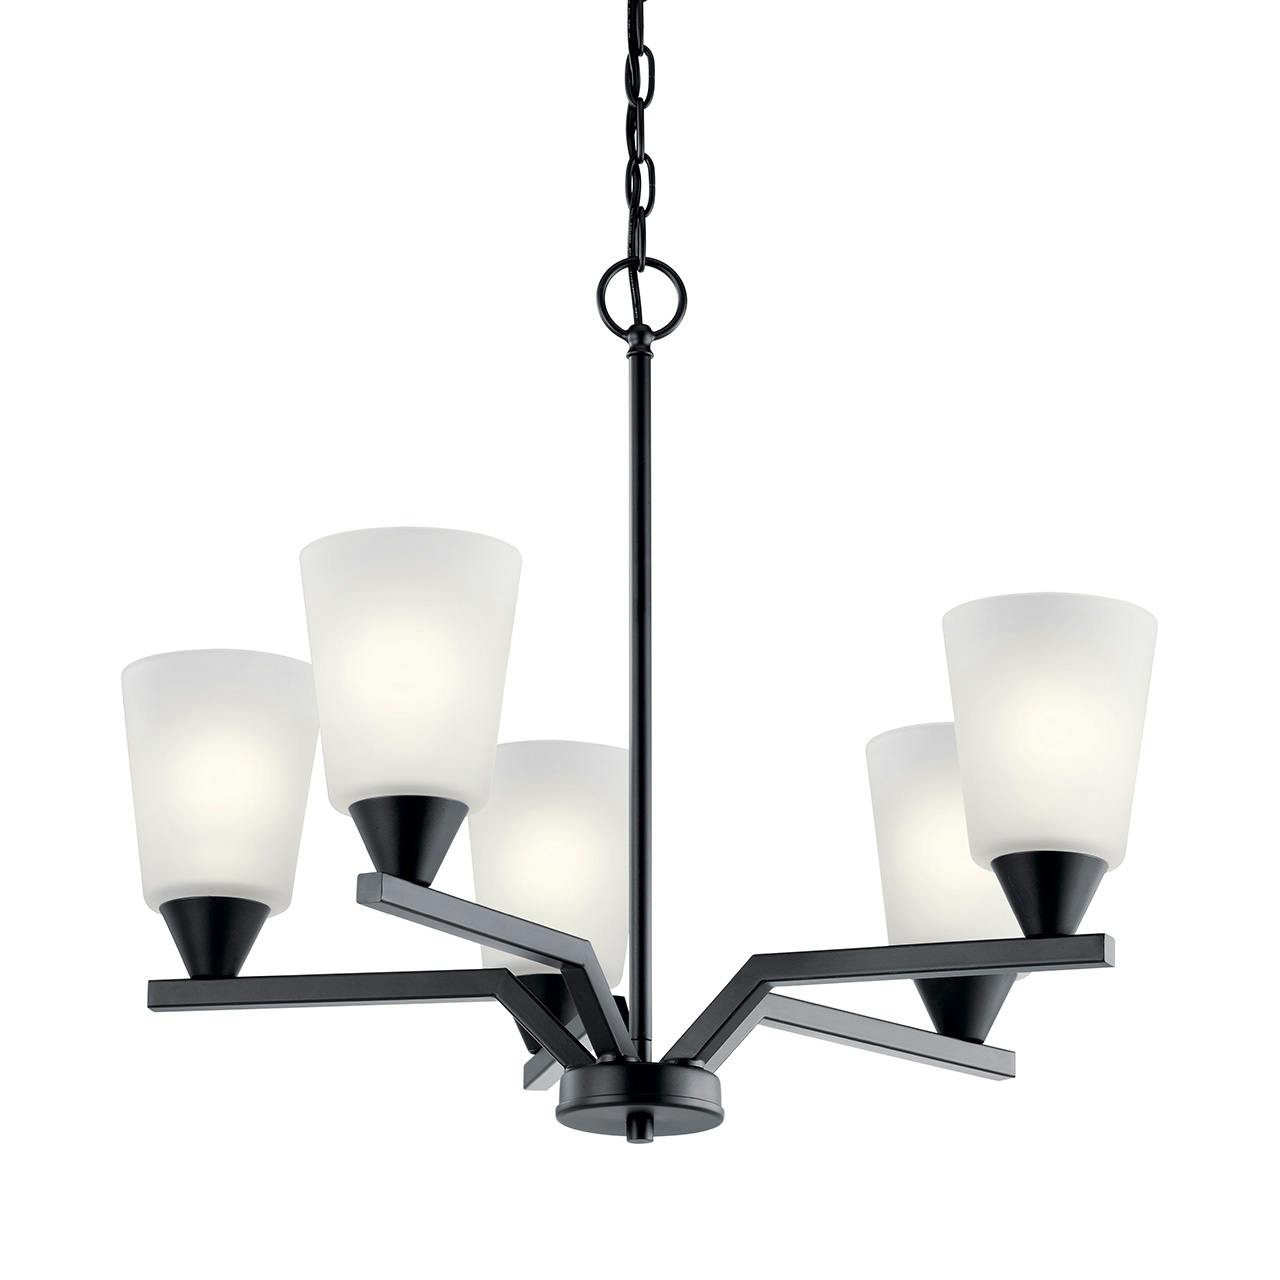 Skagos™ 5 Light Chandelier Black without the canopy on a white background